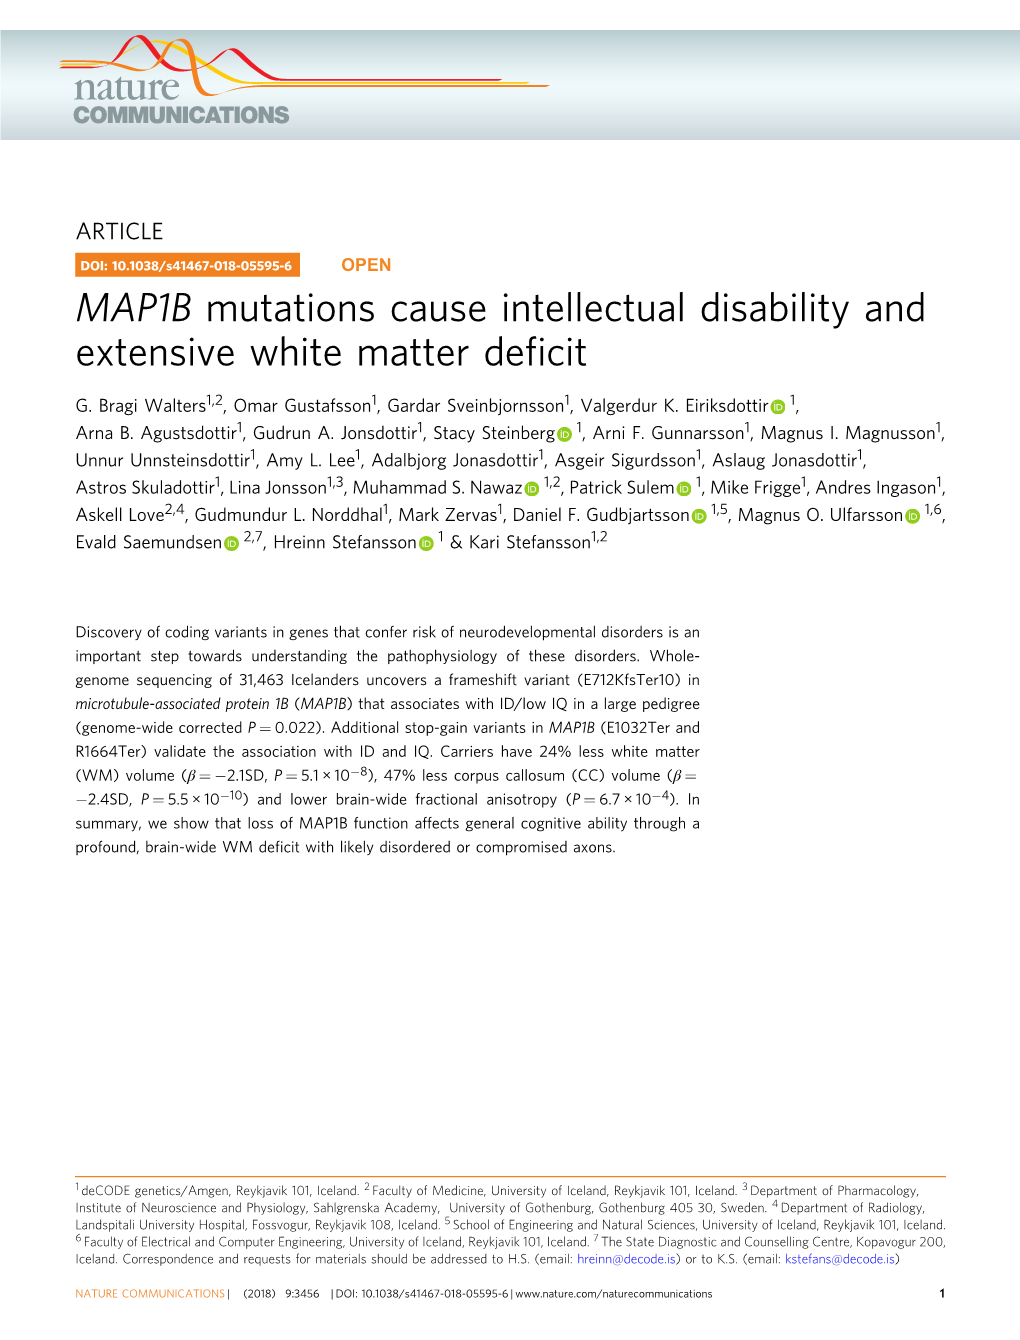 MAP1B Mutations Cause Intellectual Disability and Extensive White Matter Deﬁcit